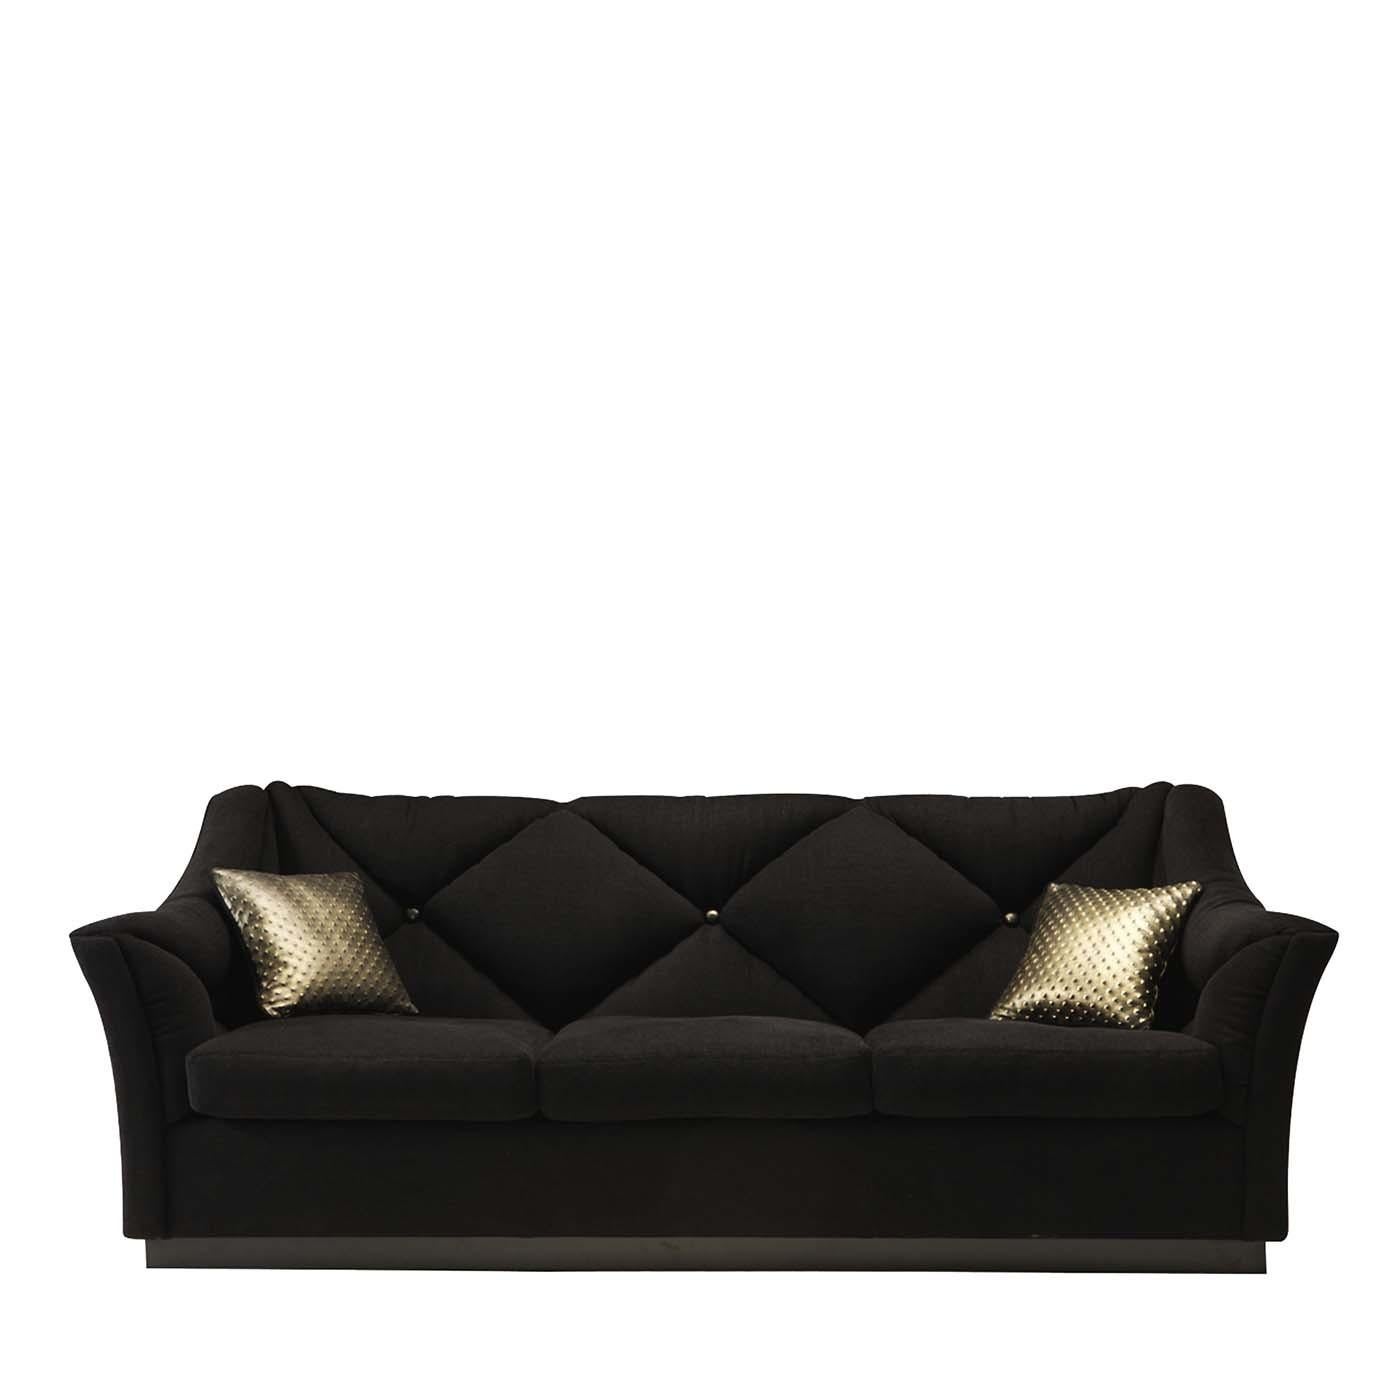 This stunning sofa is a superb furniture piece that combines exquisite craftsmanship with comfortable seating experience. Inviting to relaxing with guests or lounging with a good book, this sofa is a sophisticated choice for the modern home. It